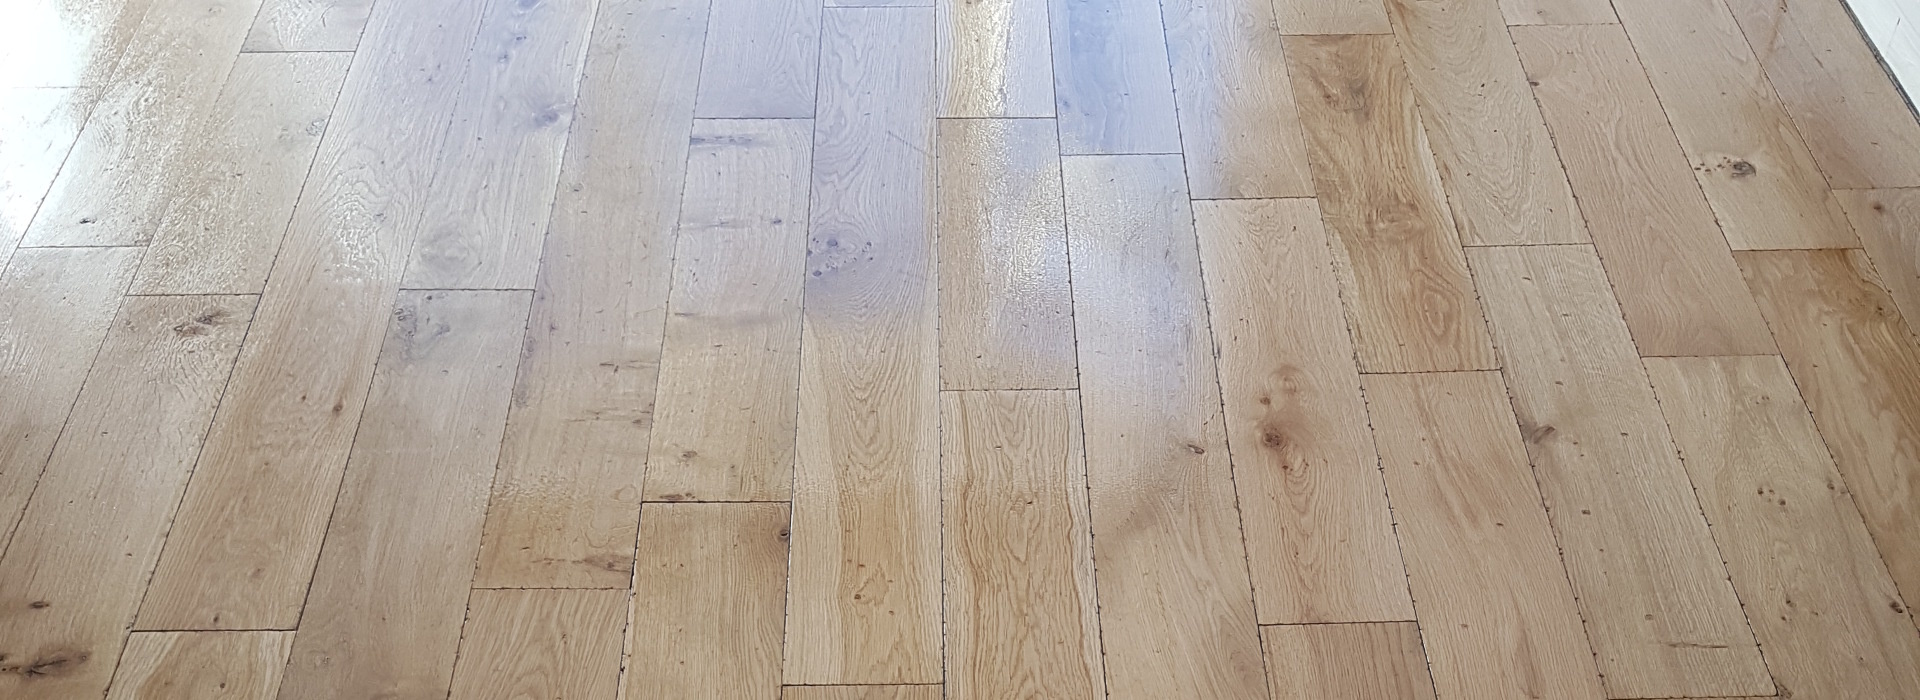 Your home also deserves a touch up with quality Solid wood flooring